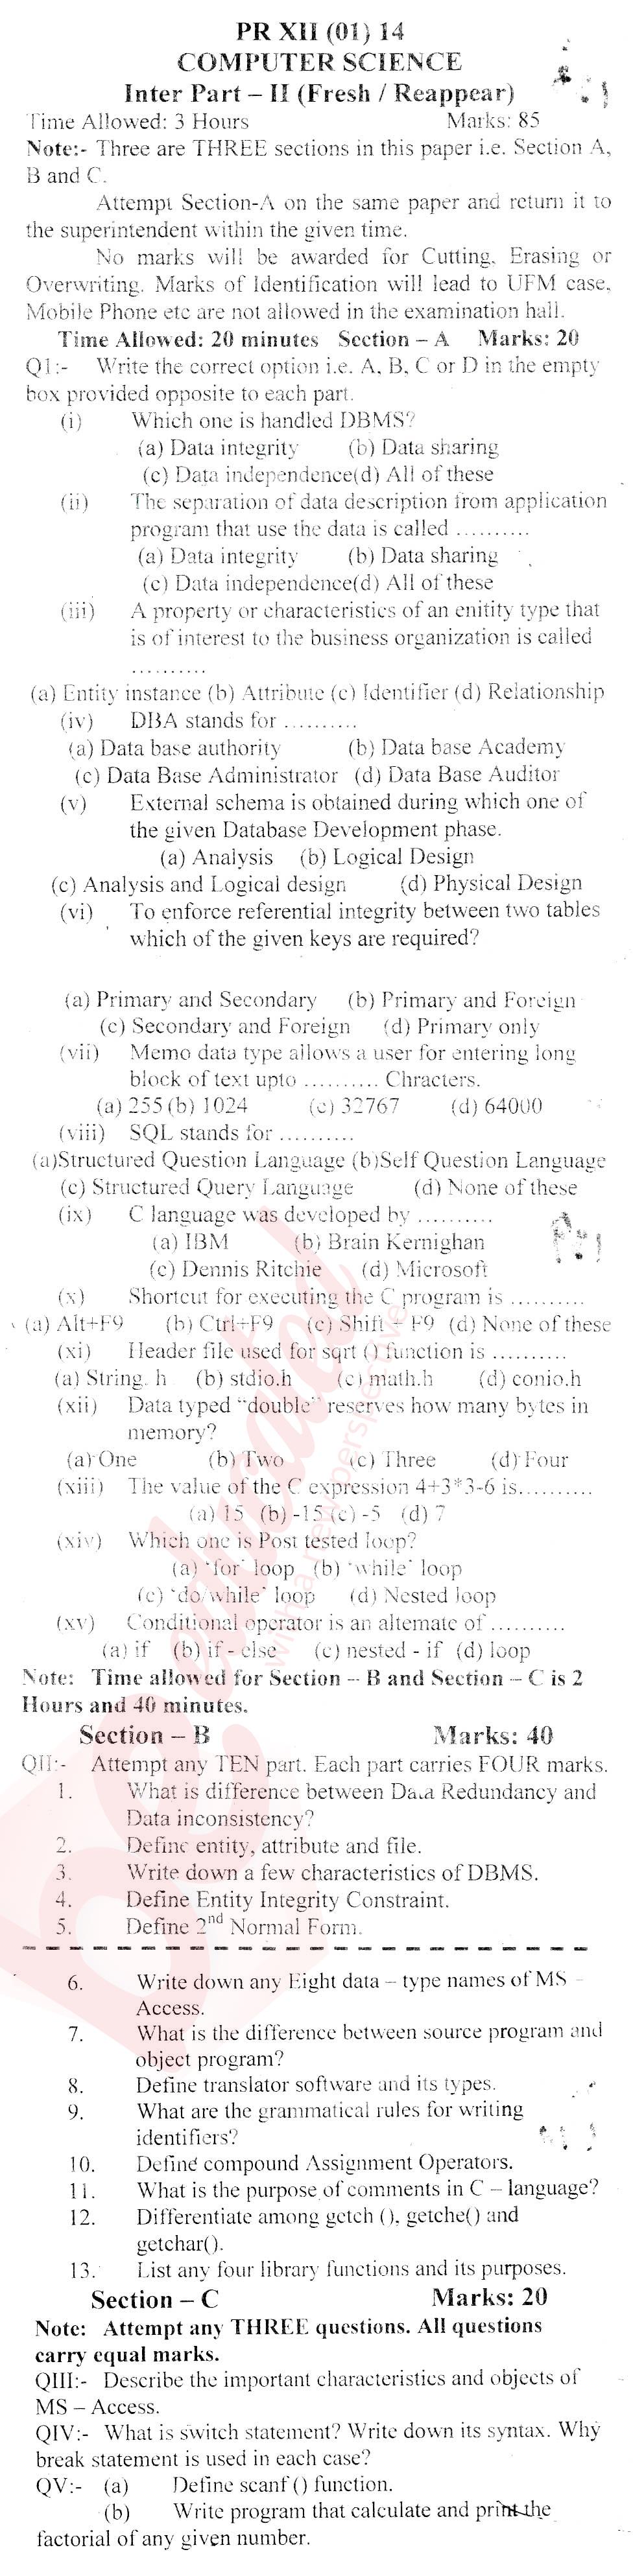 Computer Science FA Part 2 Past Paper Group 1 BISE Swat 2014